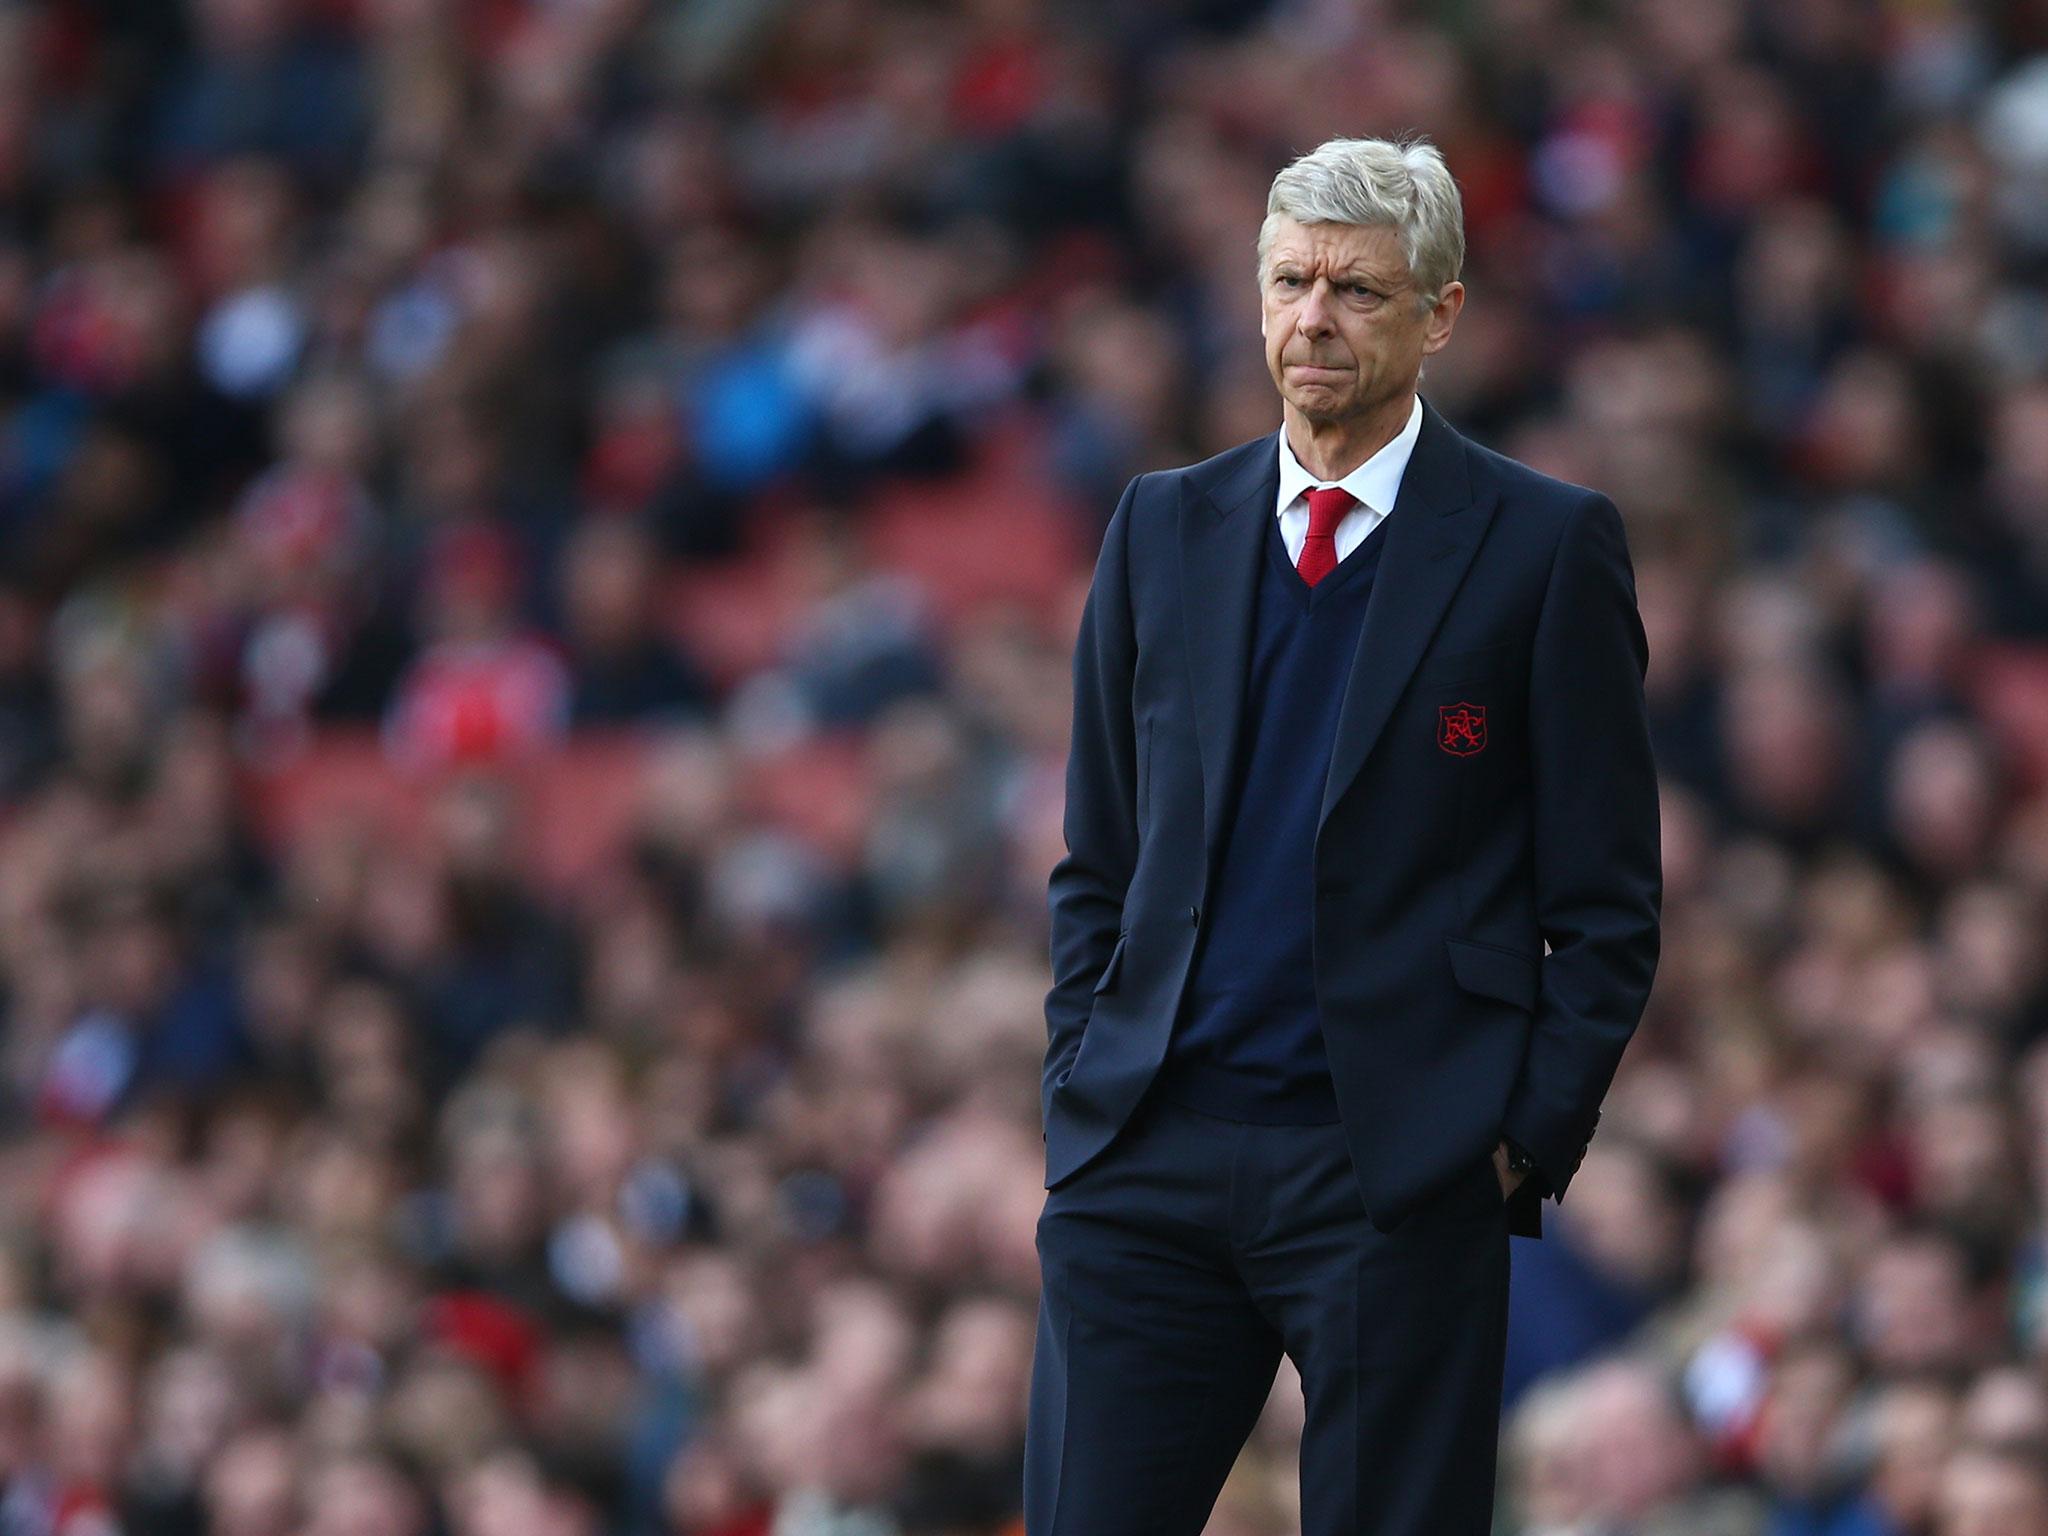 A lack of meaningful challenge in both the Premier League and Champions League has seen some Arsenal fans protest against the 68-year-old in recent years